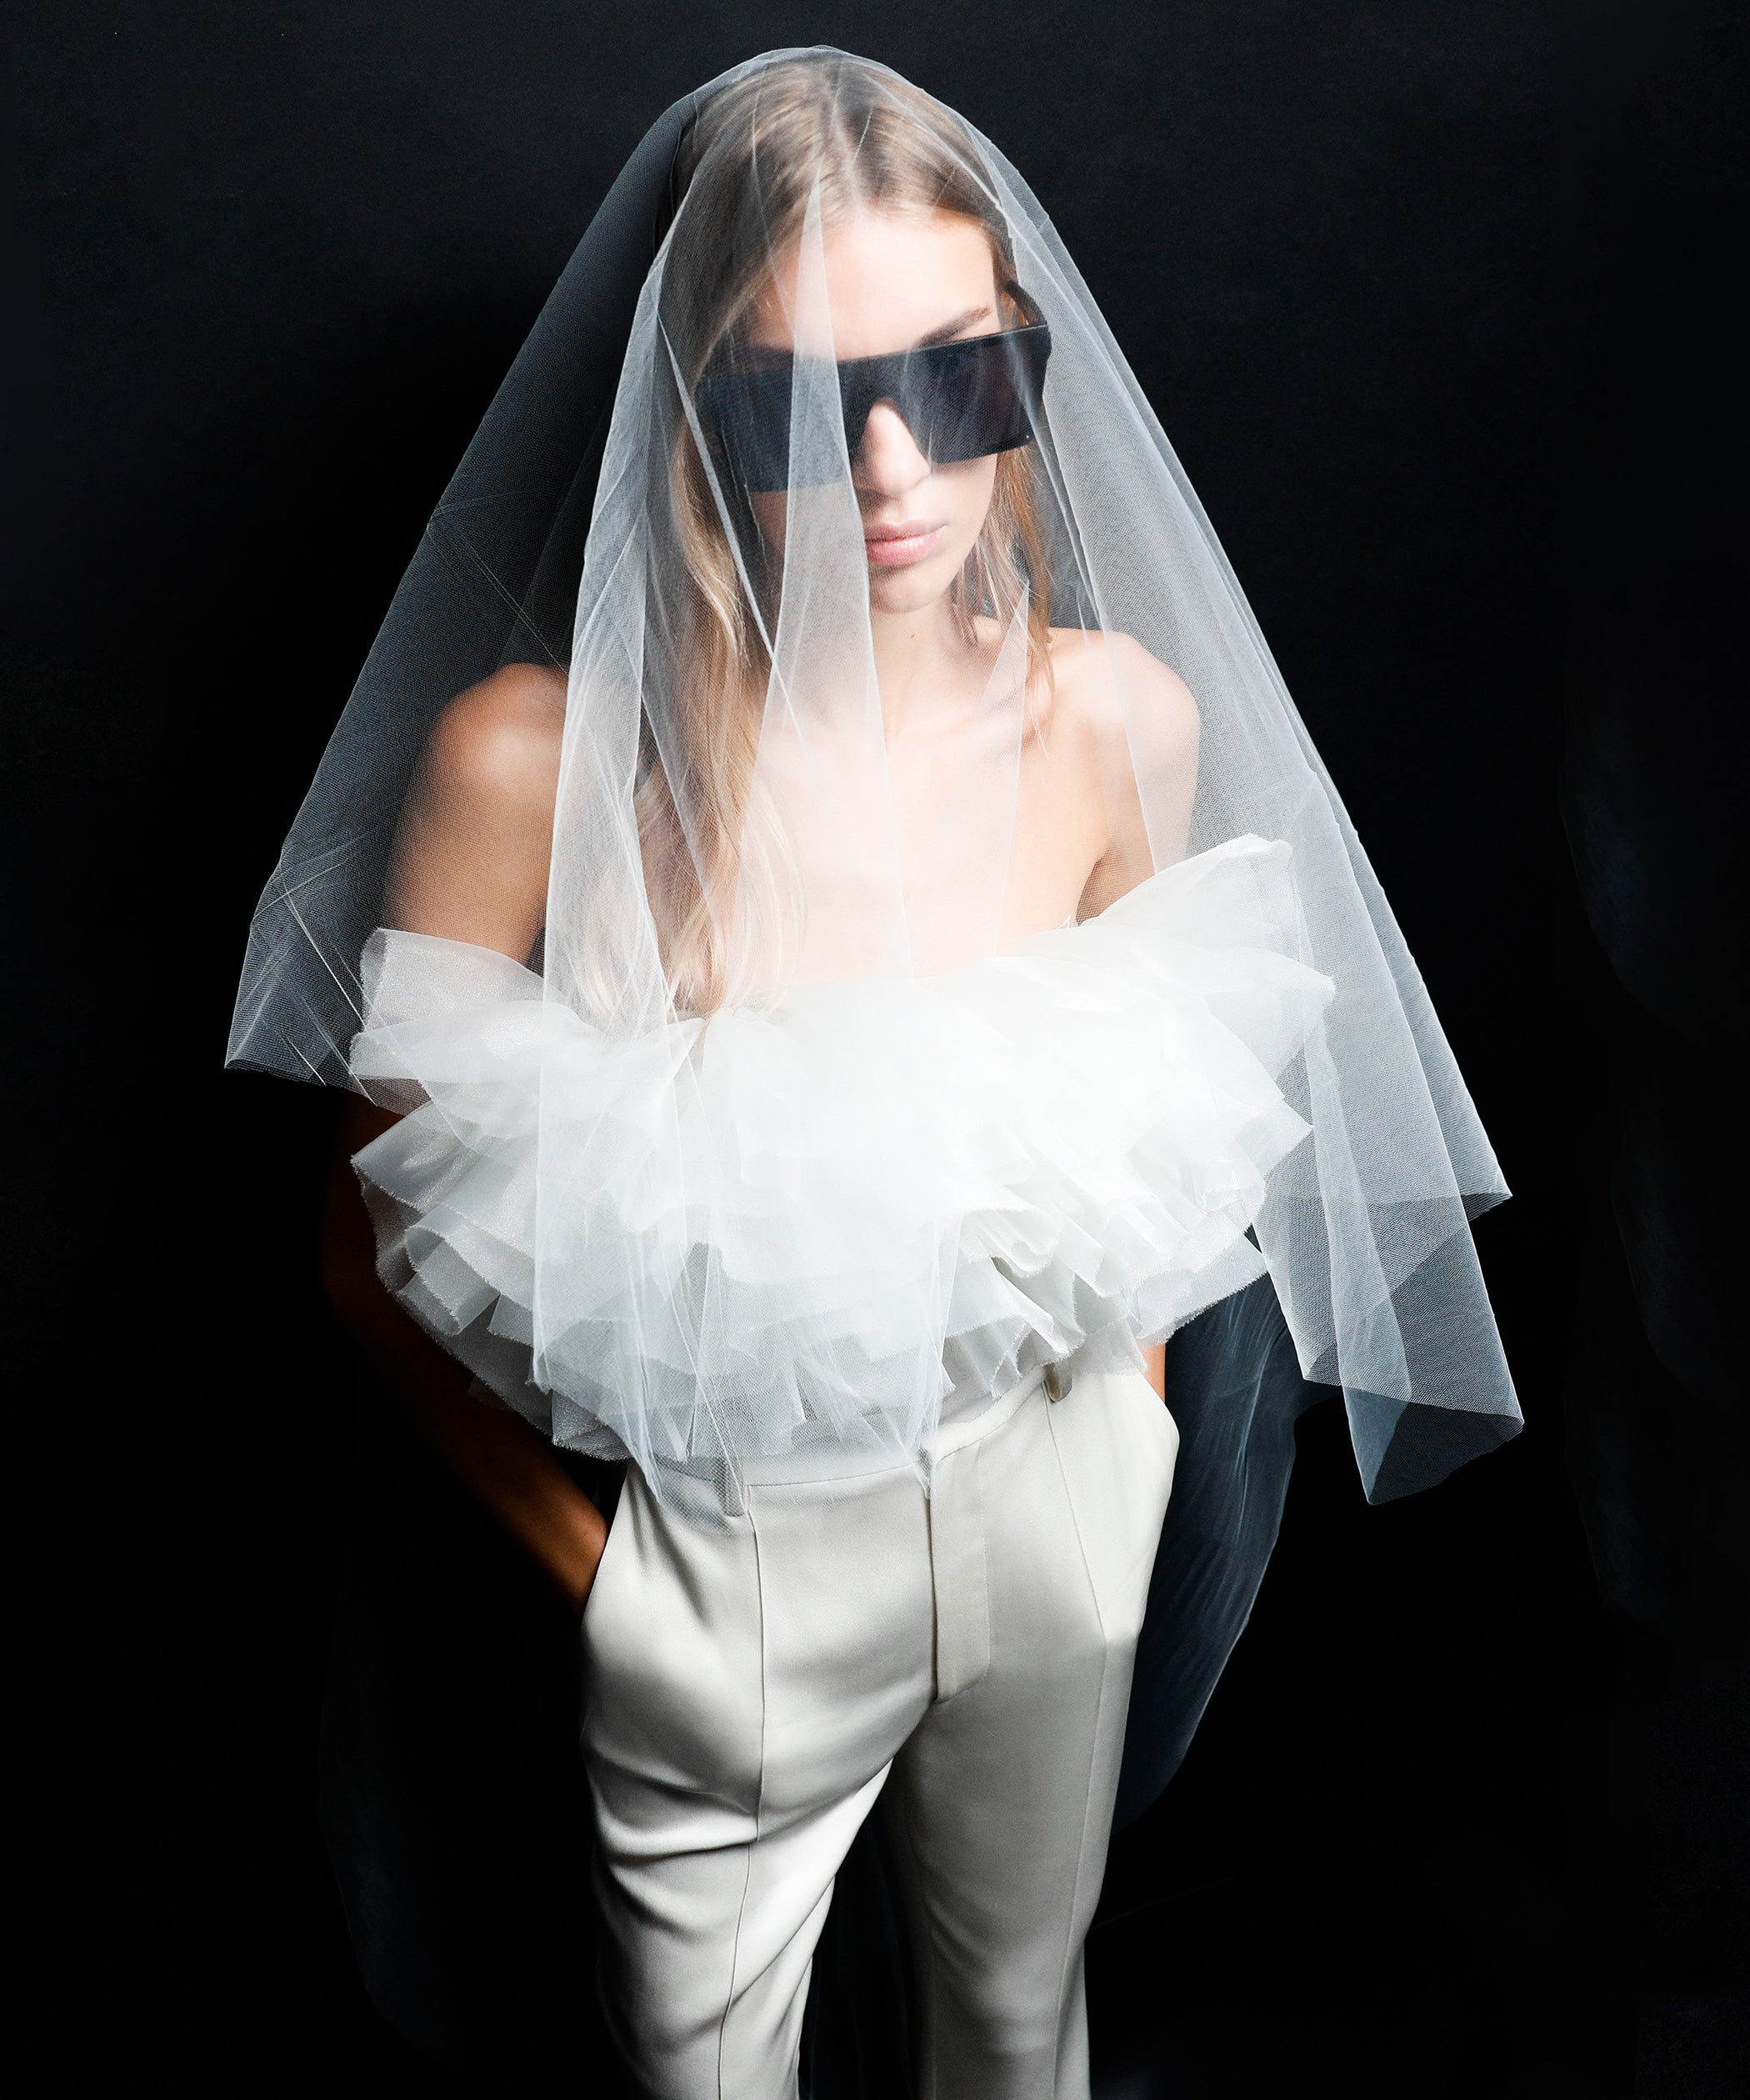 LaPointe’s New Collection Is For The Cool Bride